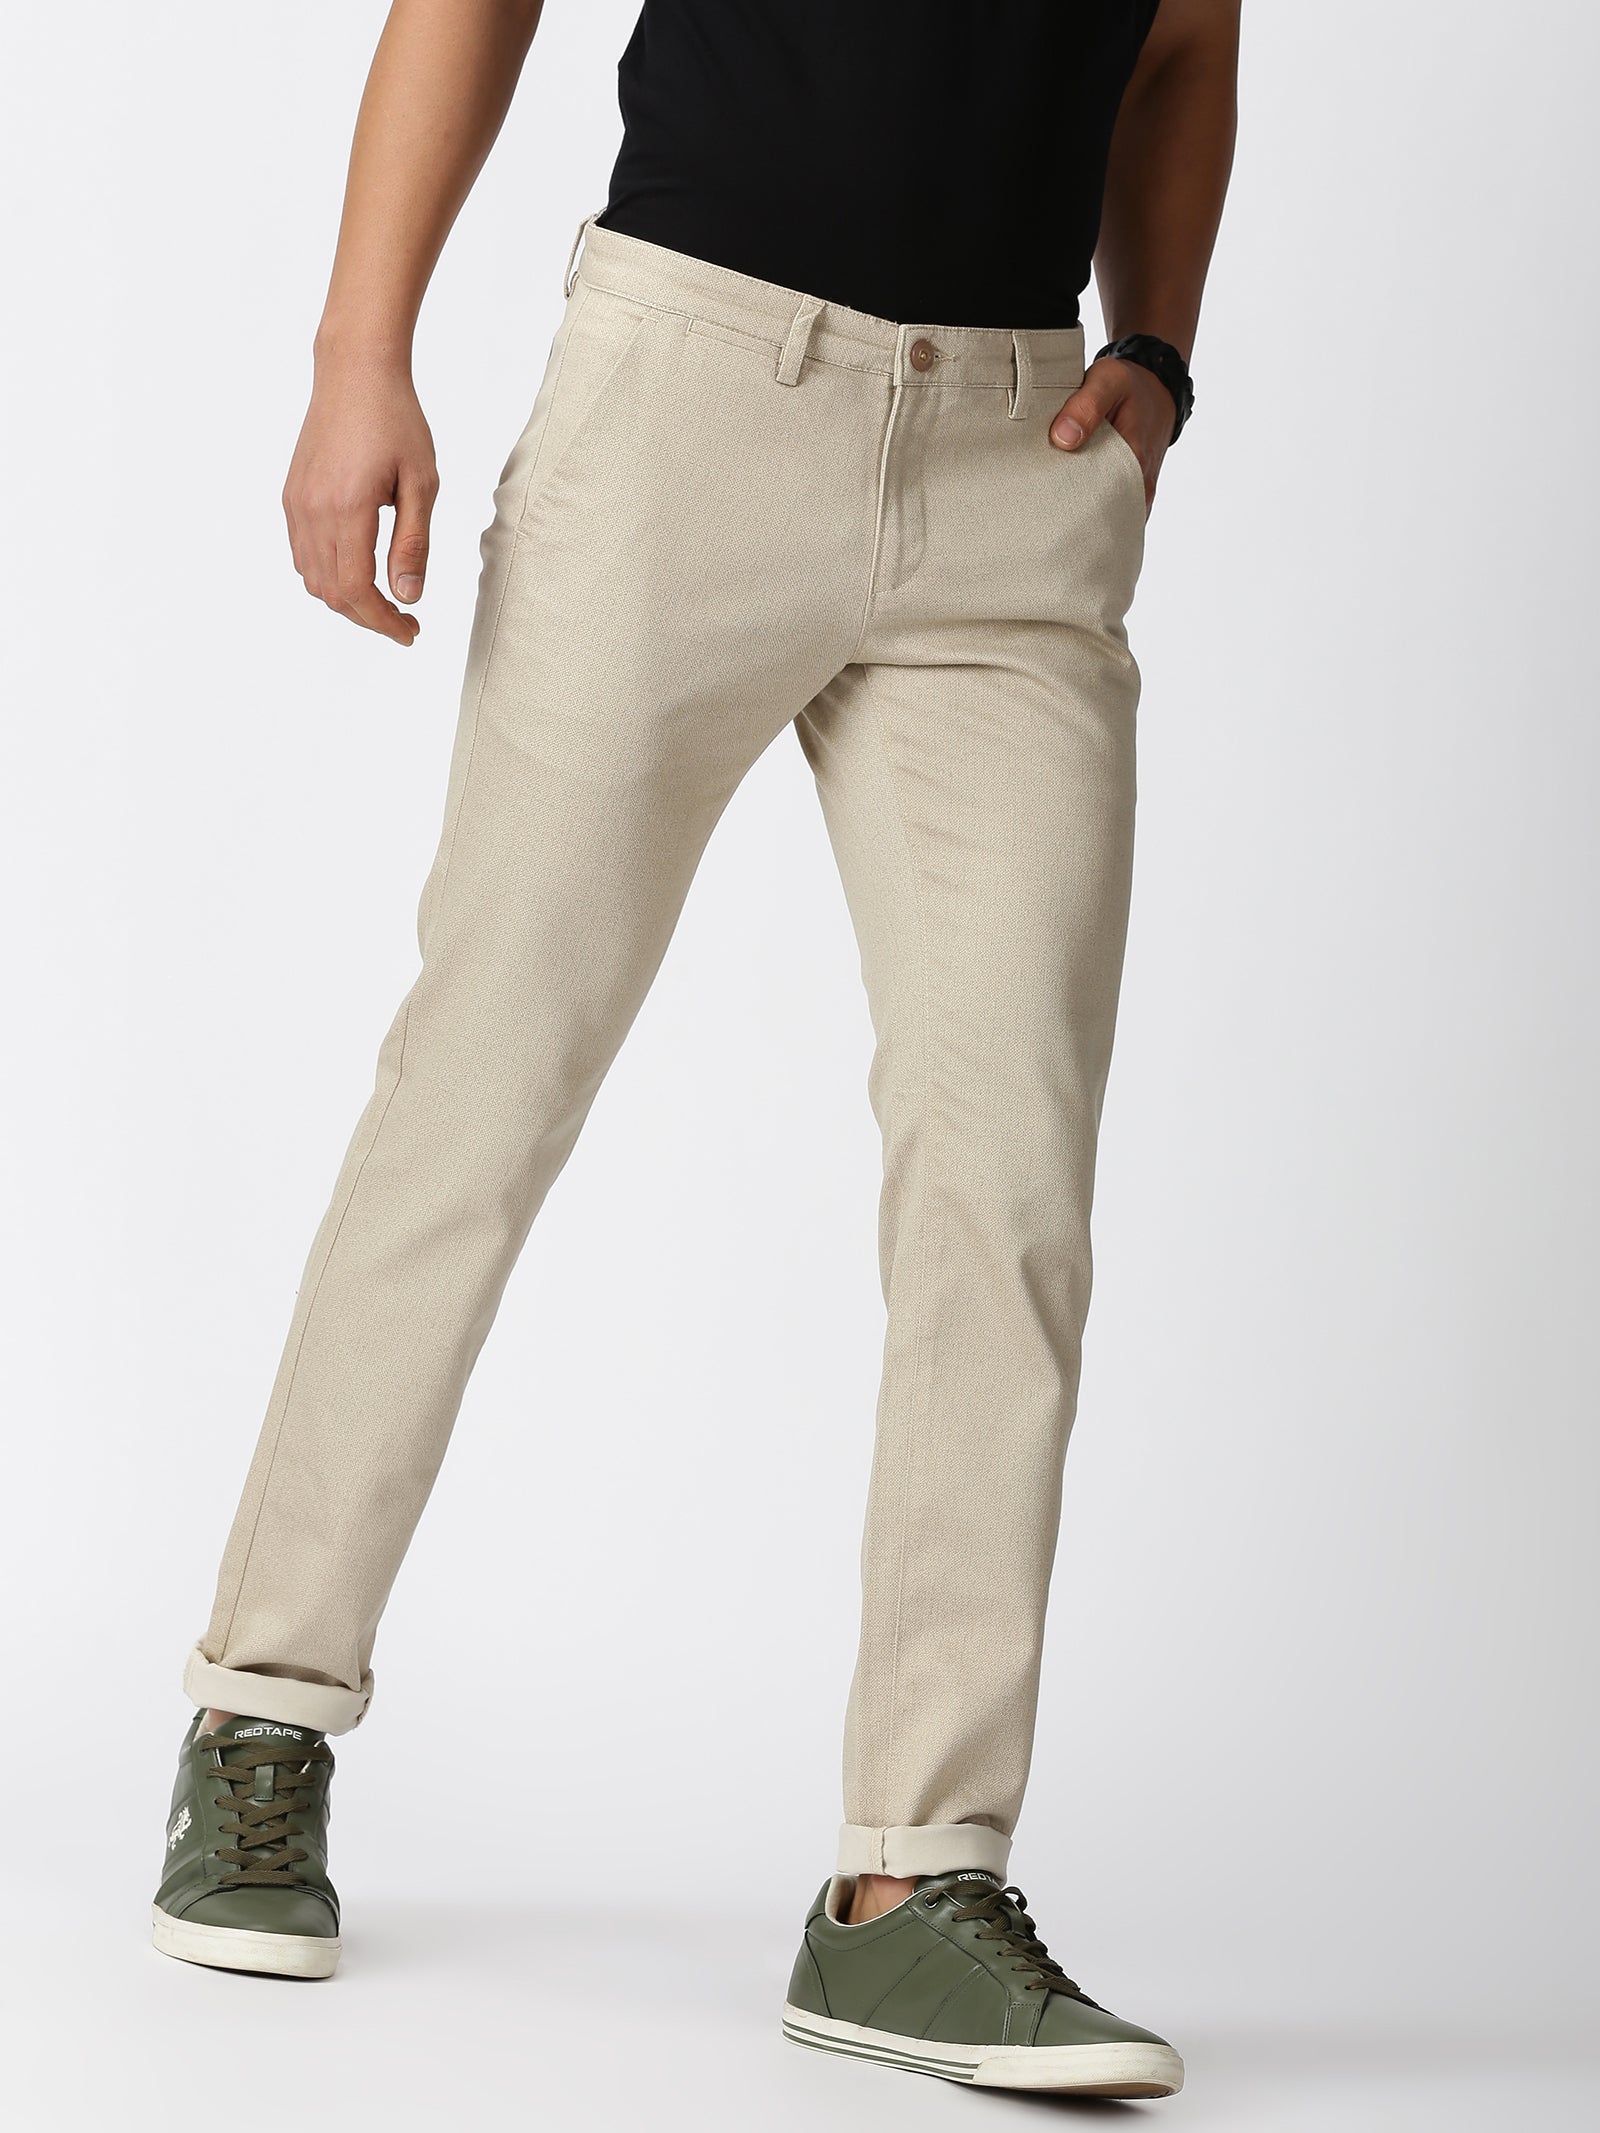 Red Tape Chinos trousers & Pants sale - discounted price | FASHIOLA INDIA